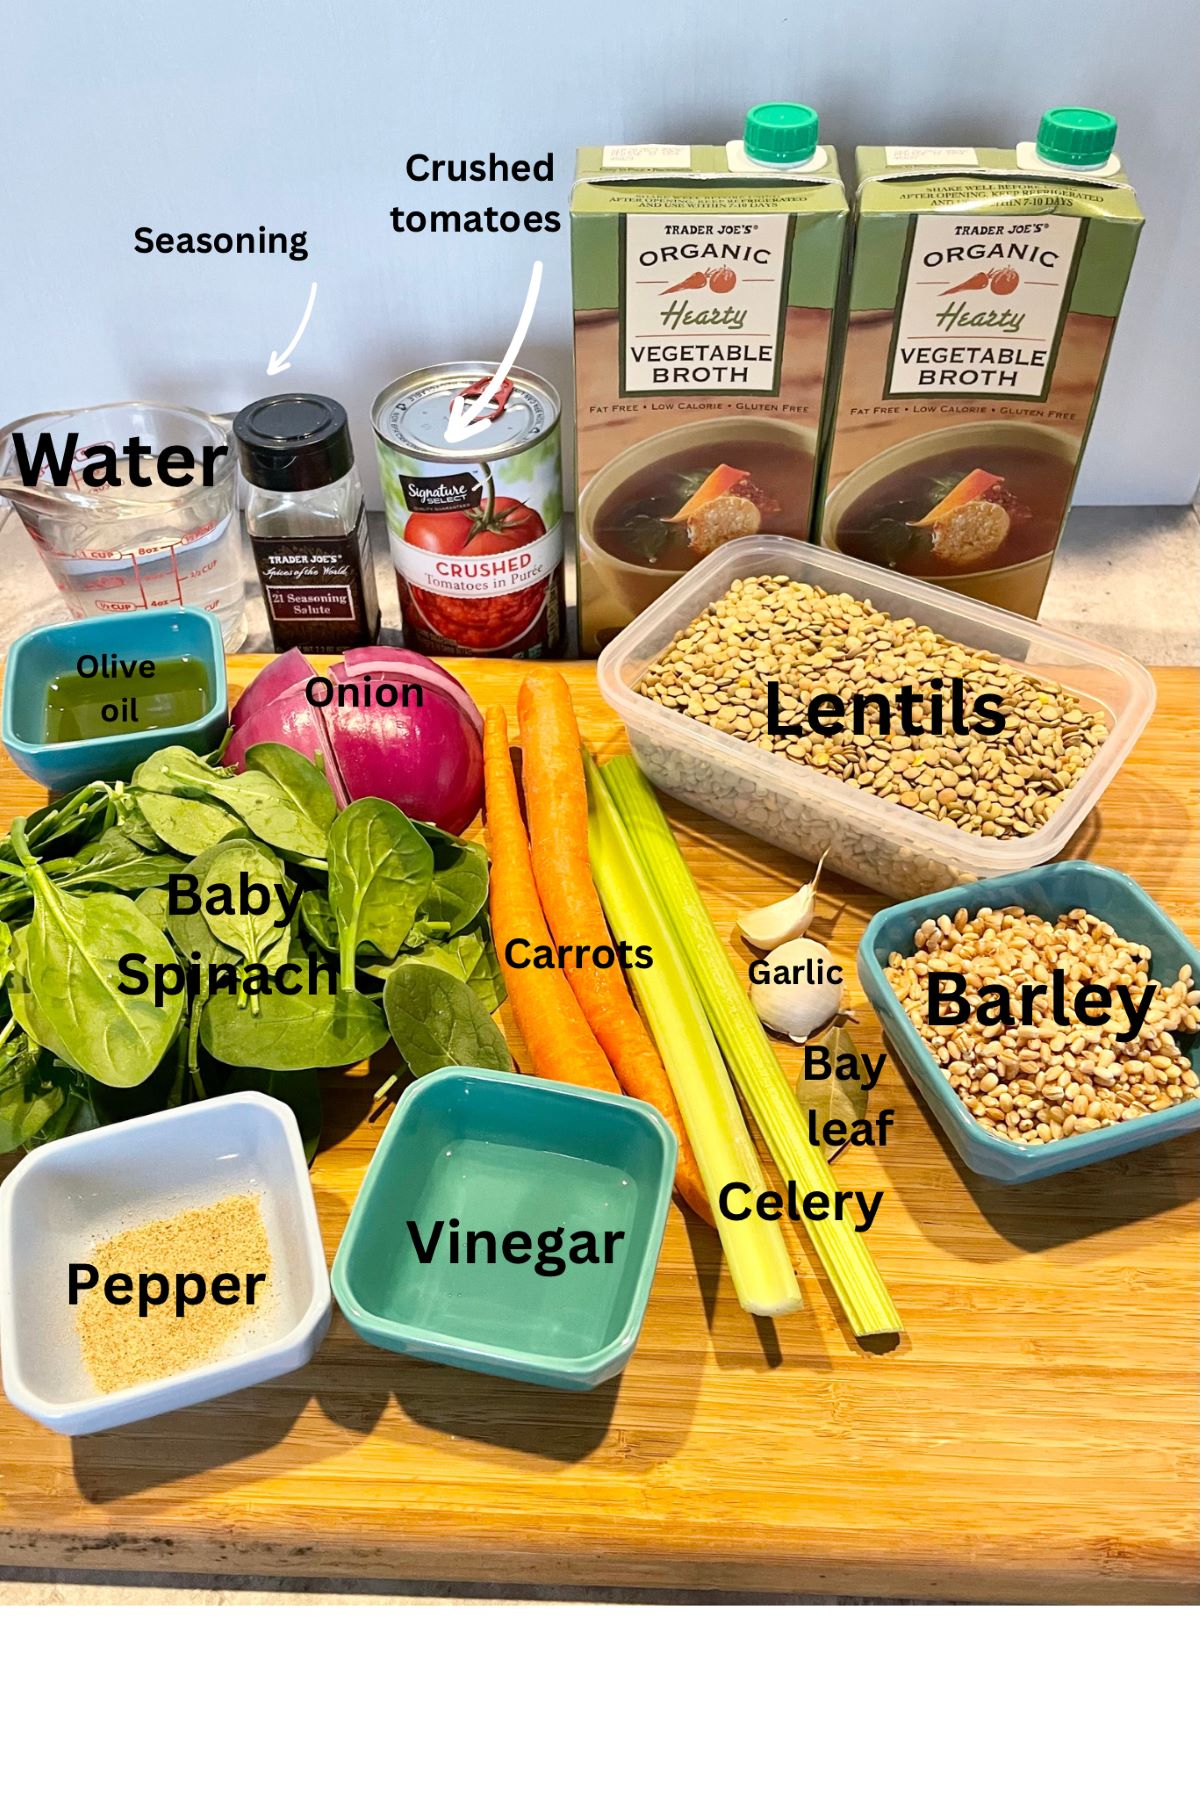 The picture displays all the ingredients needs to make carrot and lentil soup atop a wooden cutting board.  Ingredients pictured include: one cup of water, Trader Joe's 21 seasoning salute, one can of crushed tomatoes, 2 cartons of vegetable broth, olive oil, half a red onion, dried lentils, baby spinach leaves, 2 large carrots, 2 stalks of celery, 2 cloves of garlic, 1 bay leaf, dried barley, pepper, and white vinegar.